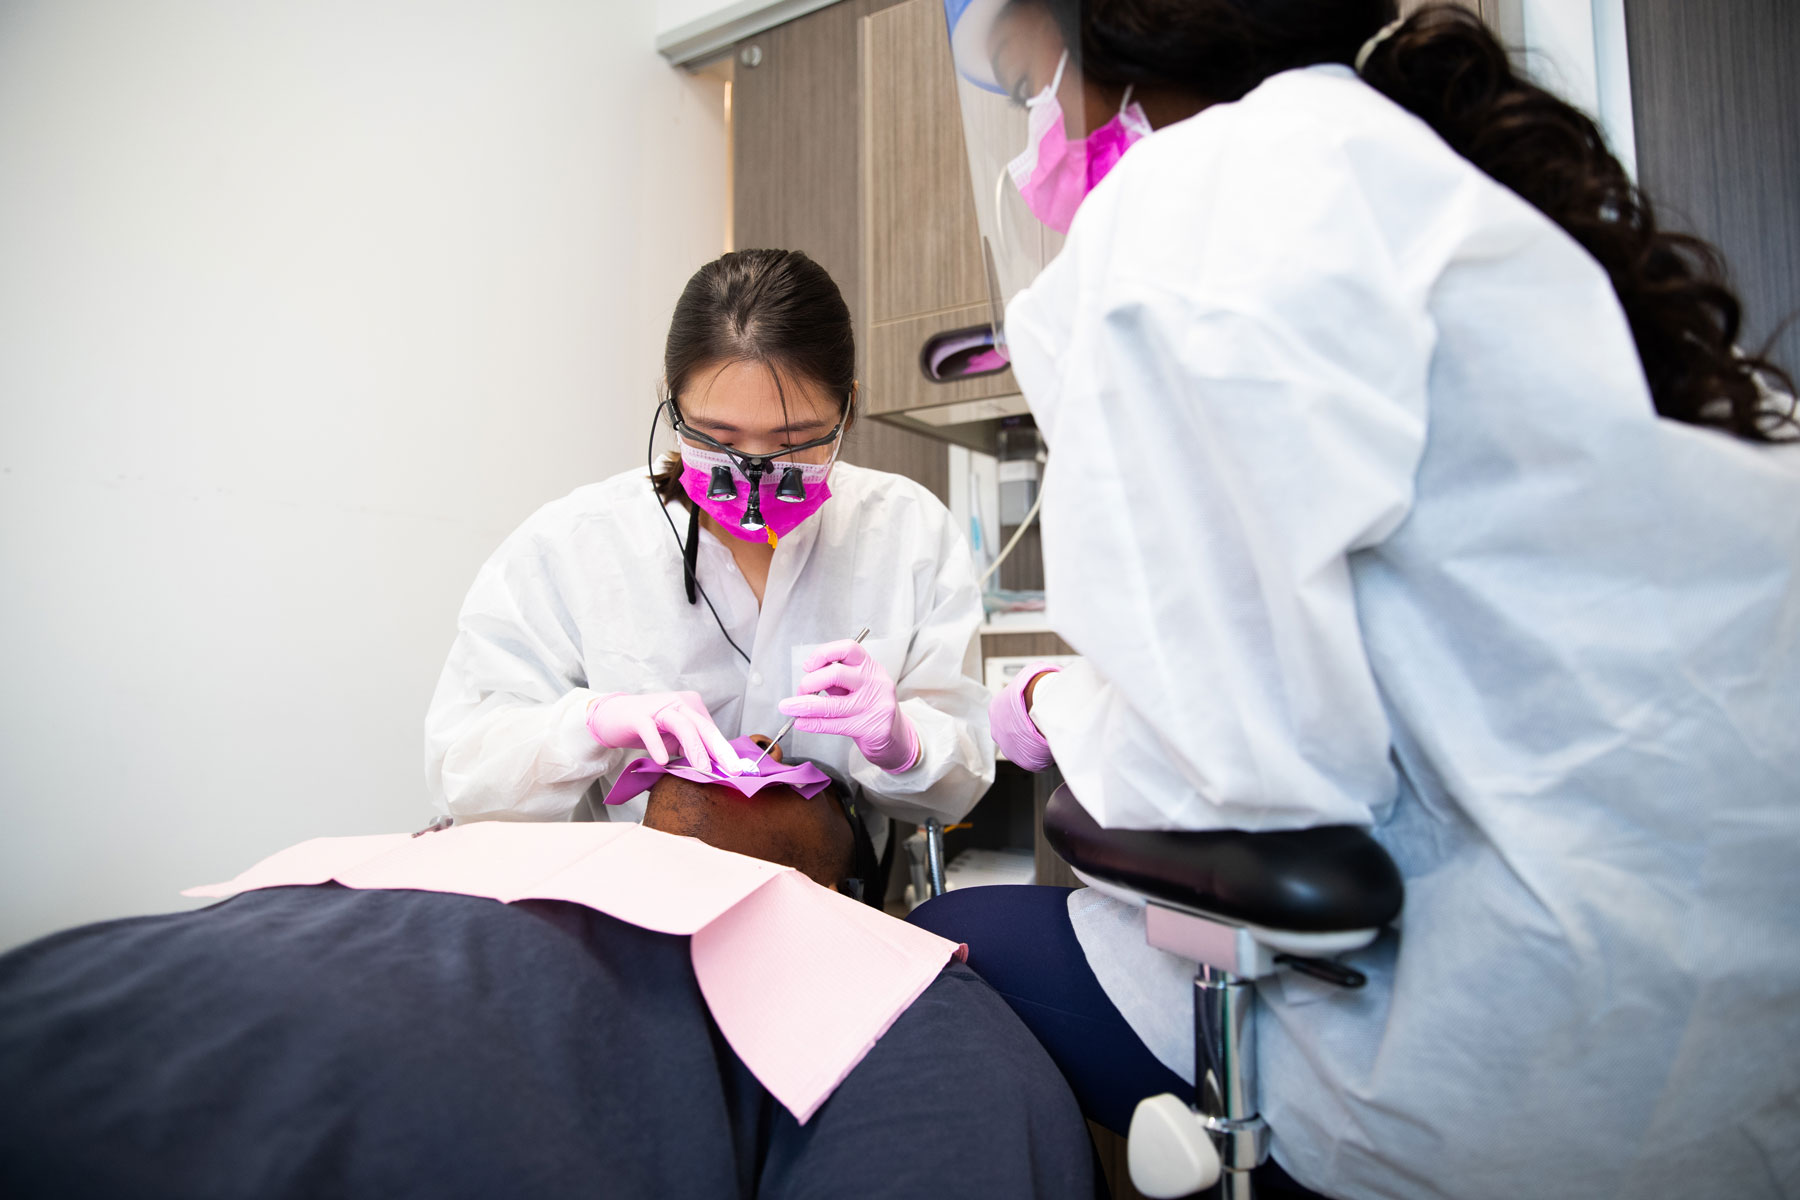 Why Waiting Until Monday For Dental Care Could Be Dangerous?